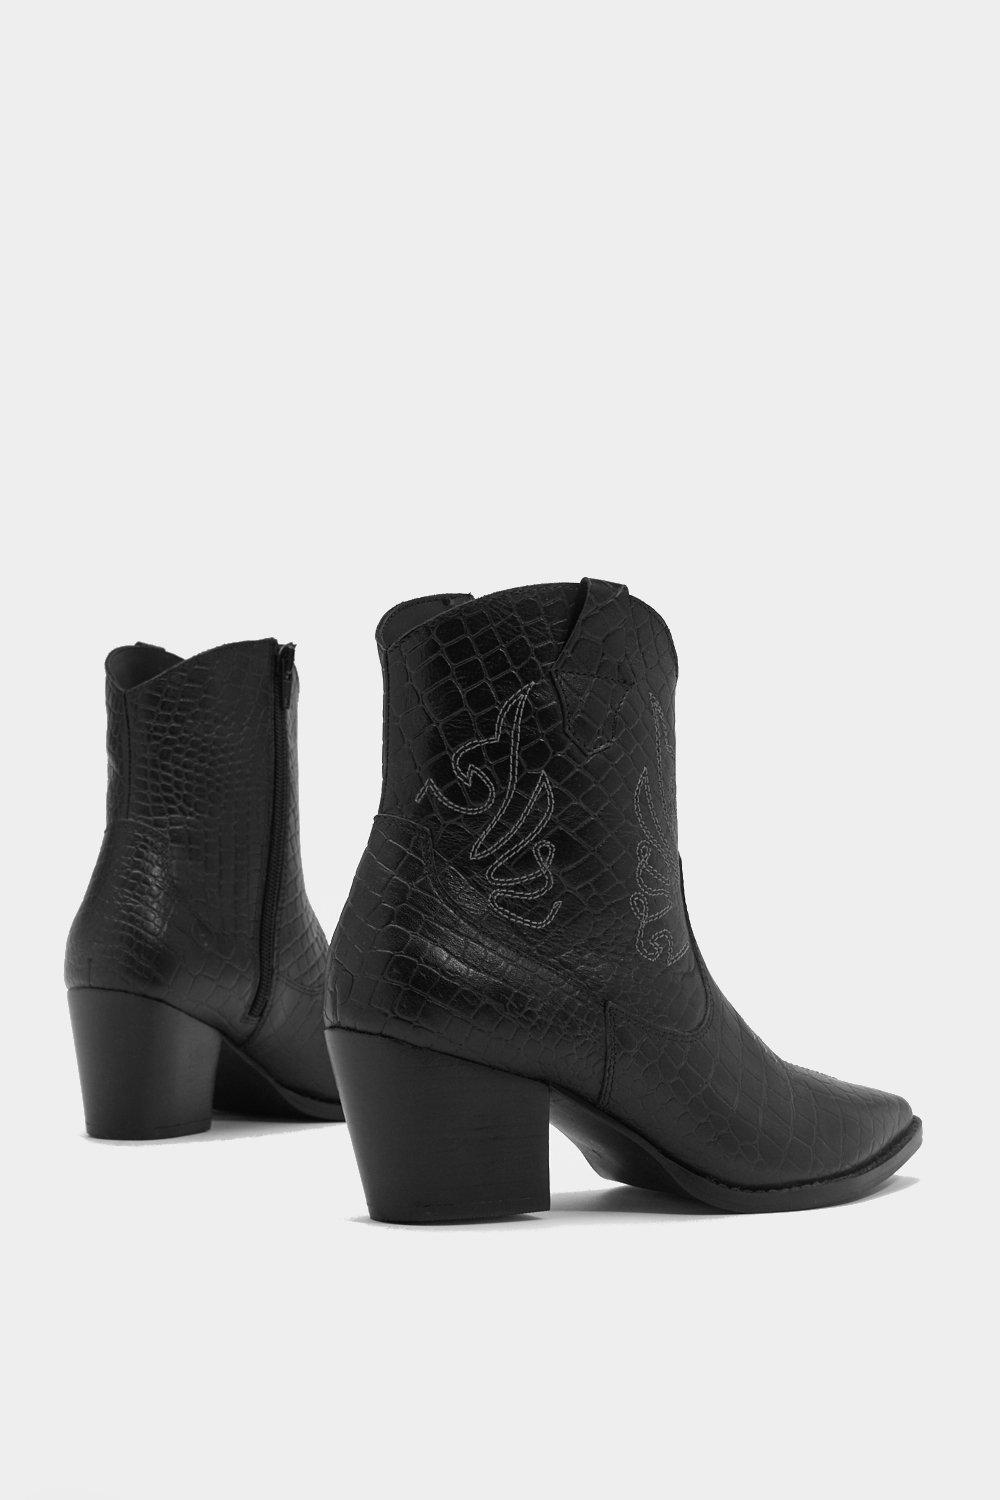 black embroidered cowboy boots